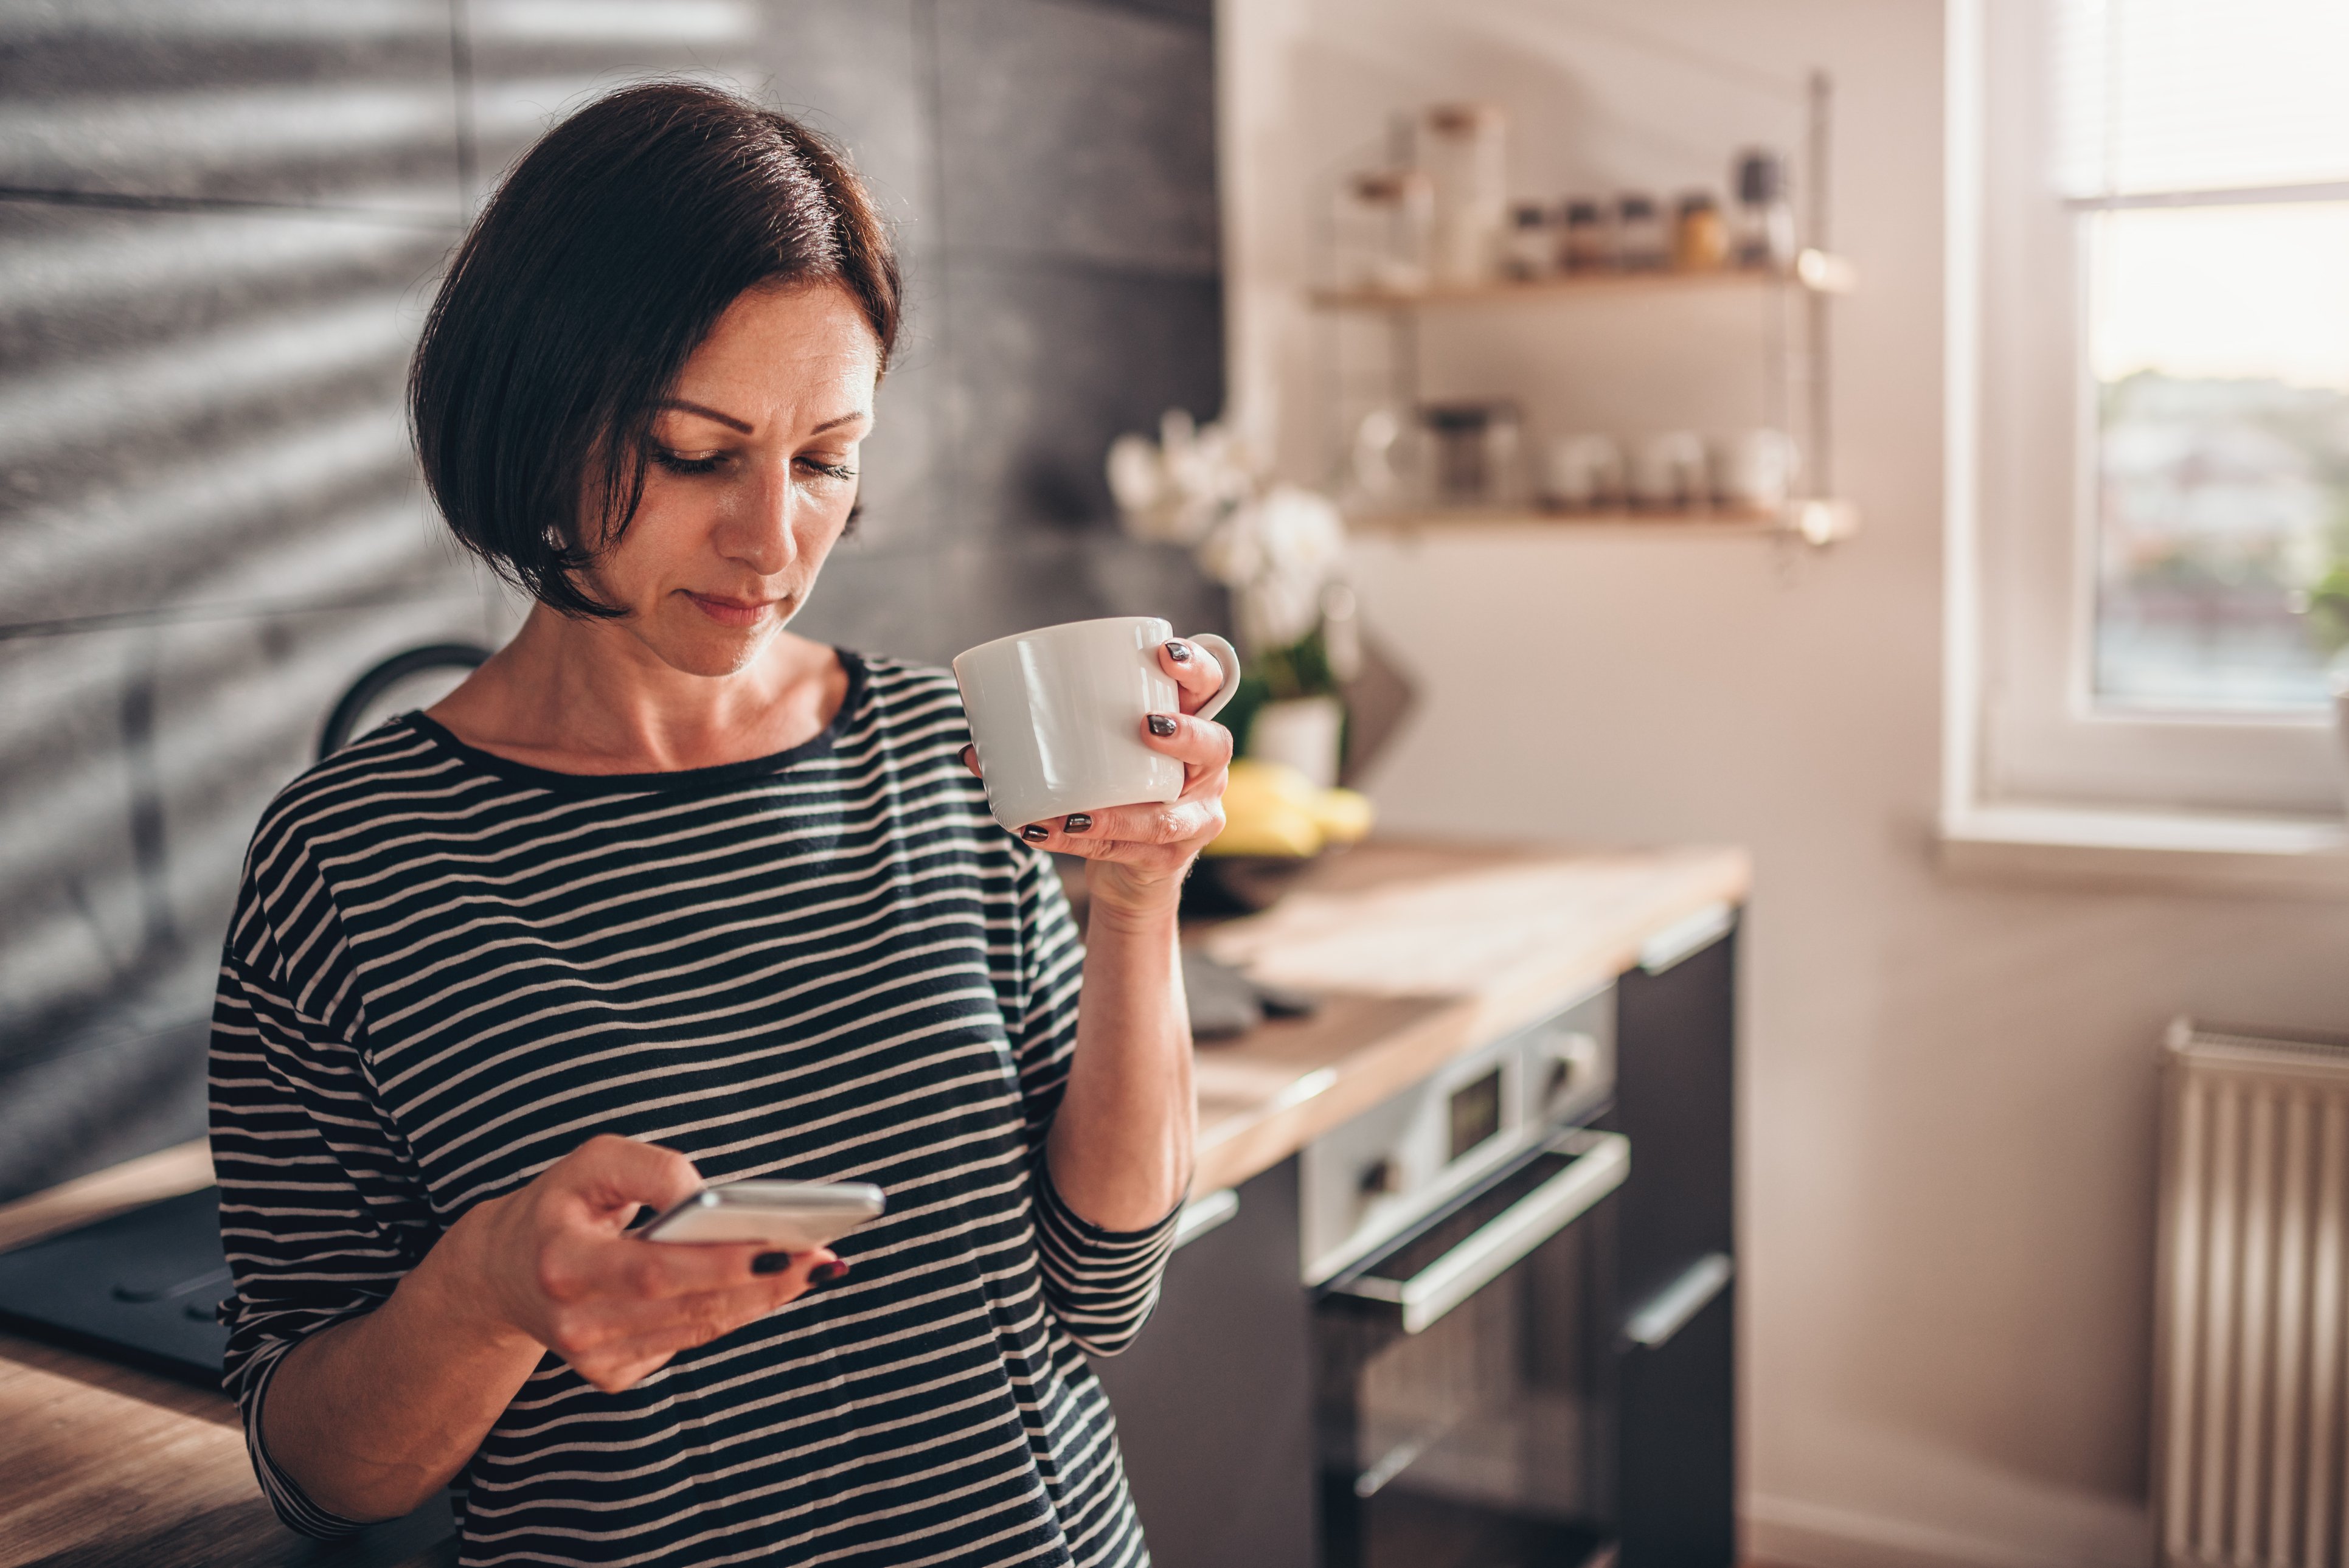 Woman standing in the kitchen and using smart phone